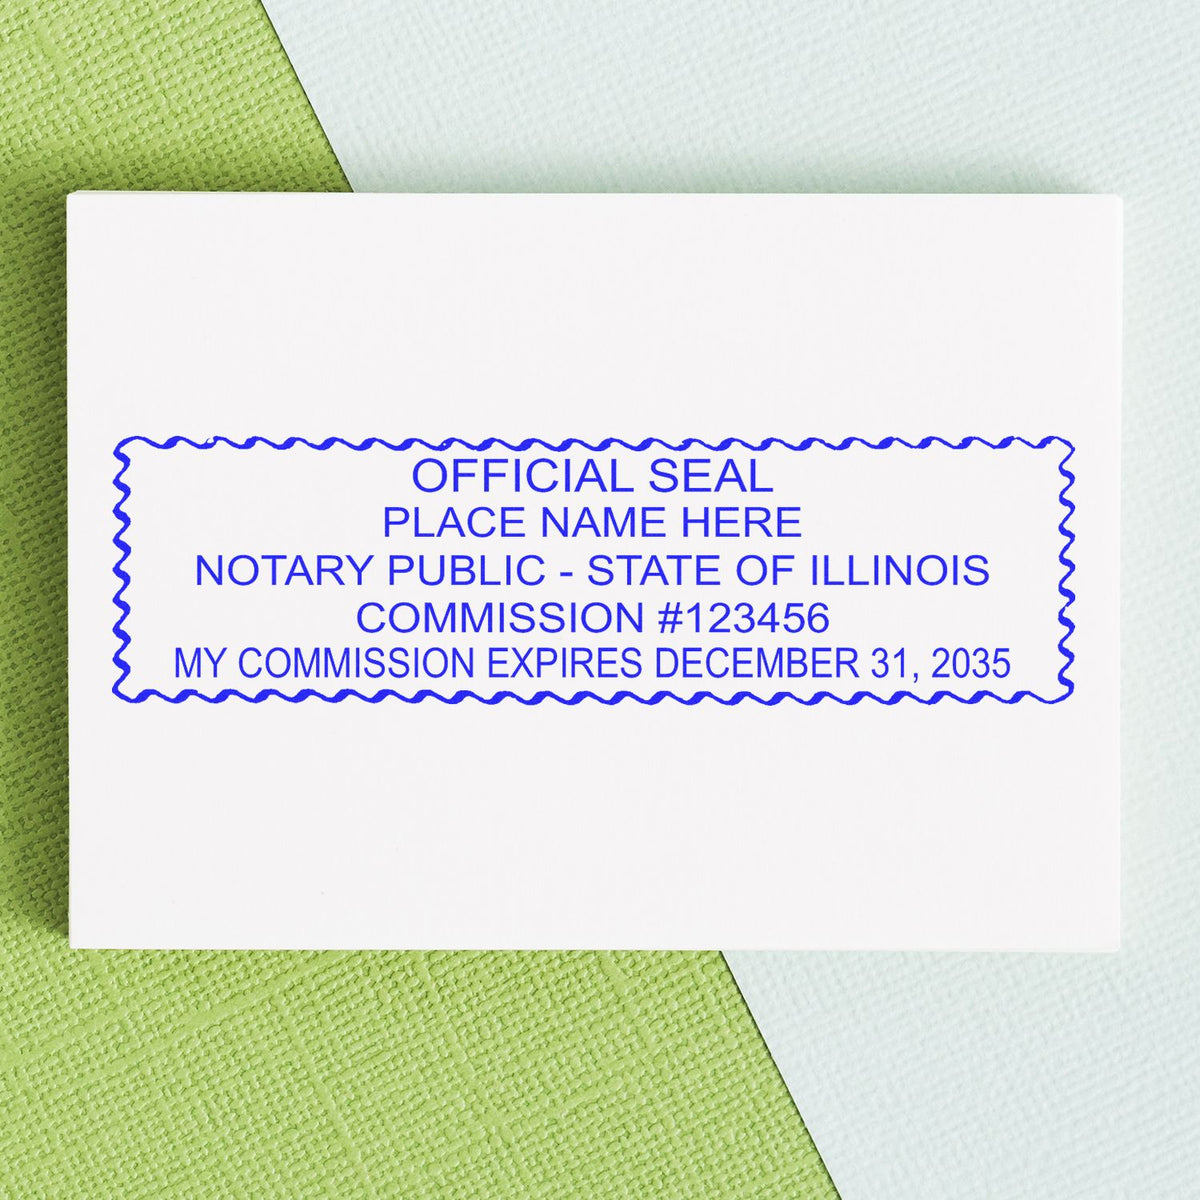 This paper is stamped with a sample imprint of the Wooden Handle Illinois Rectangular Notary Public Stamp, signifying its quality and reliability.